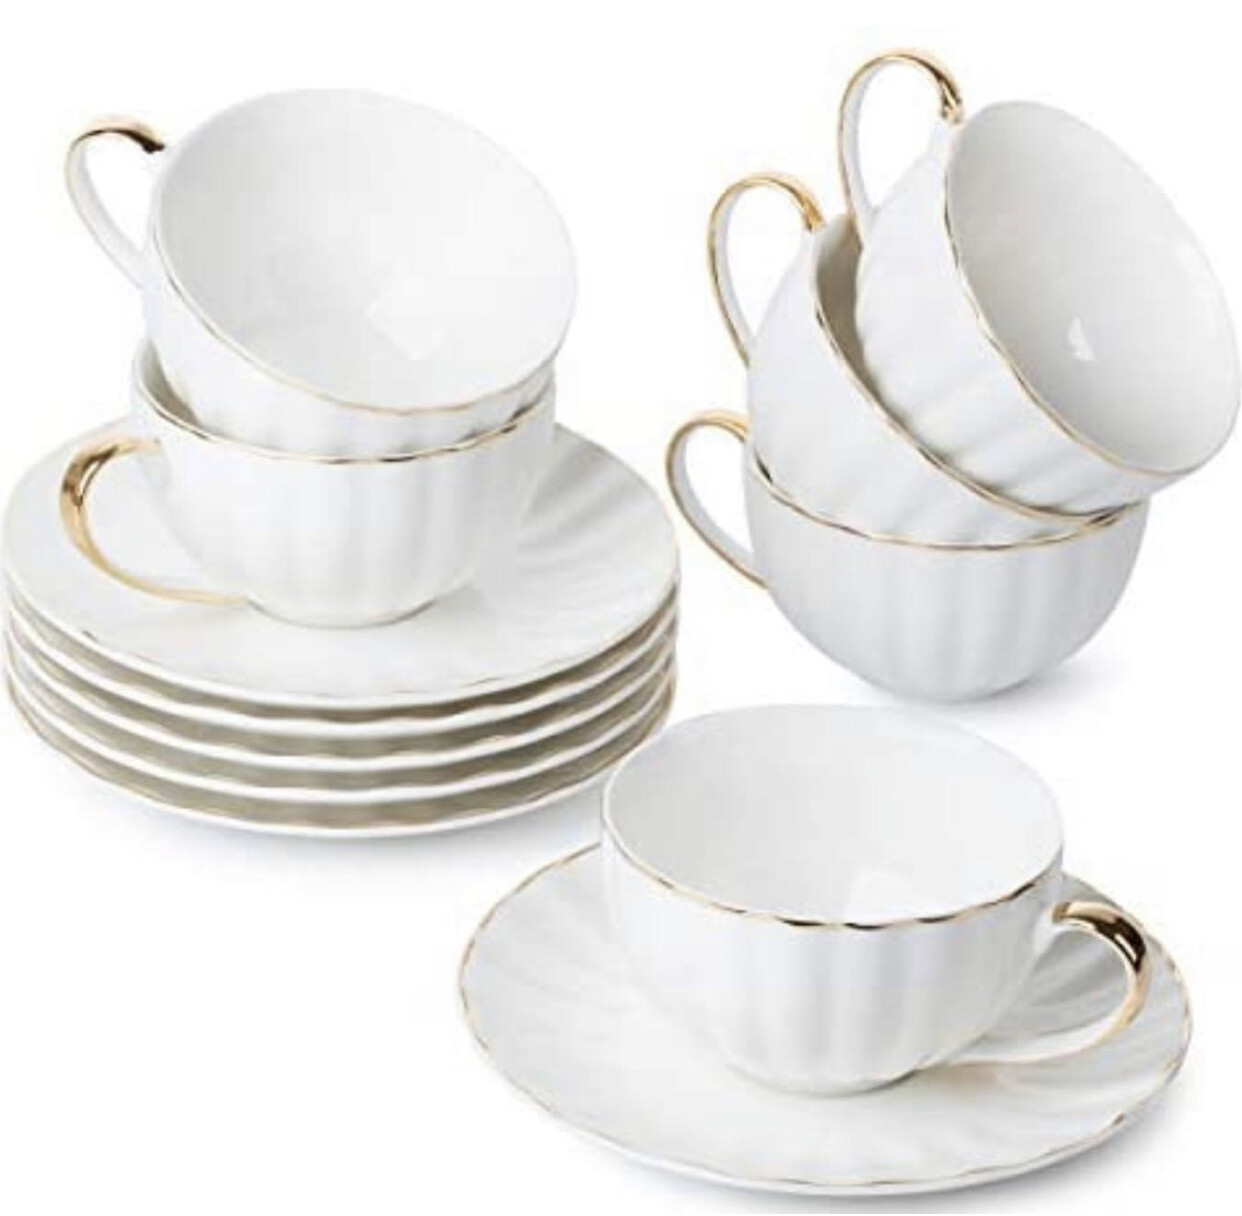 White and Gold Teacup and Saucer Set